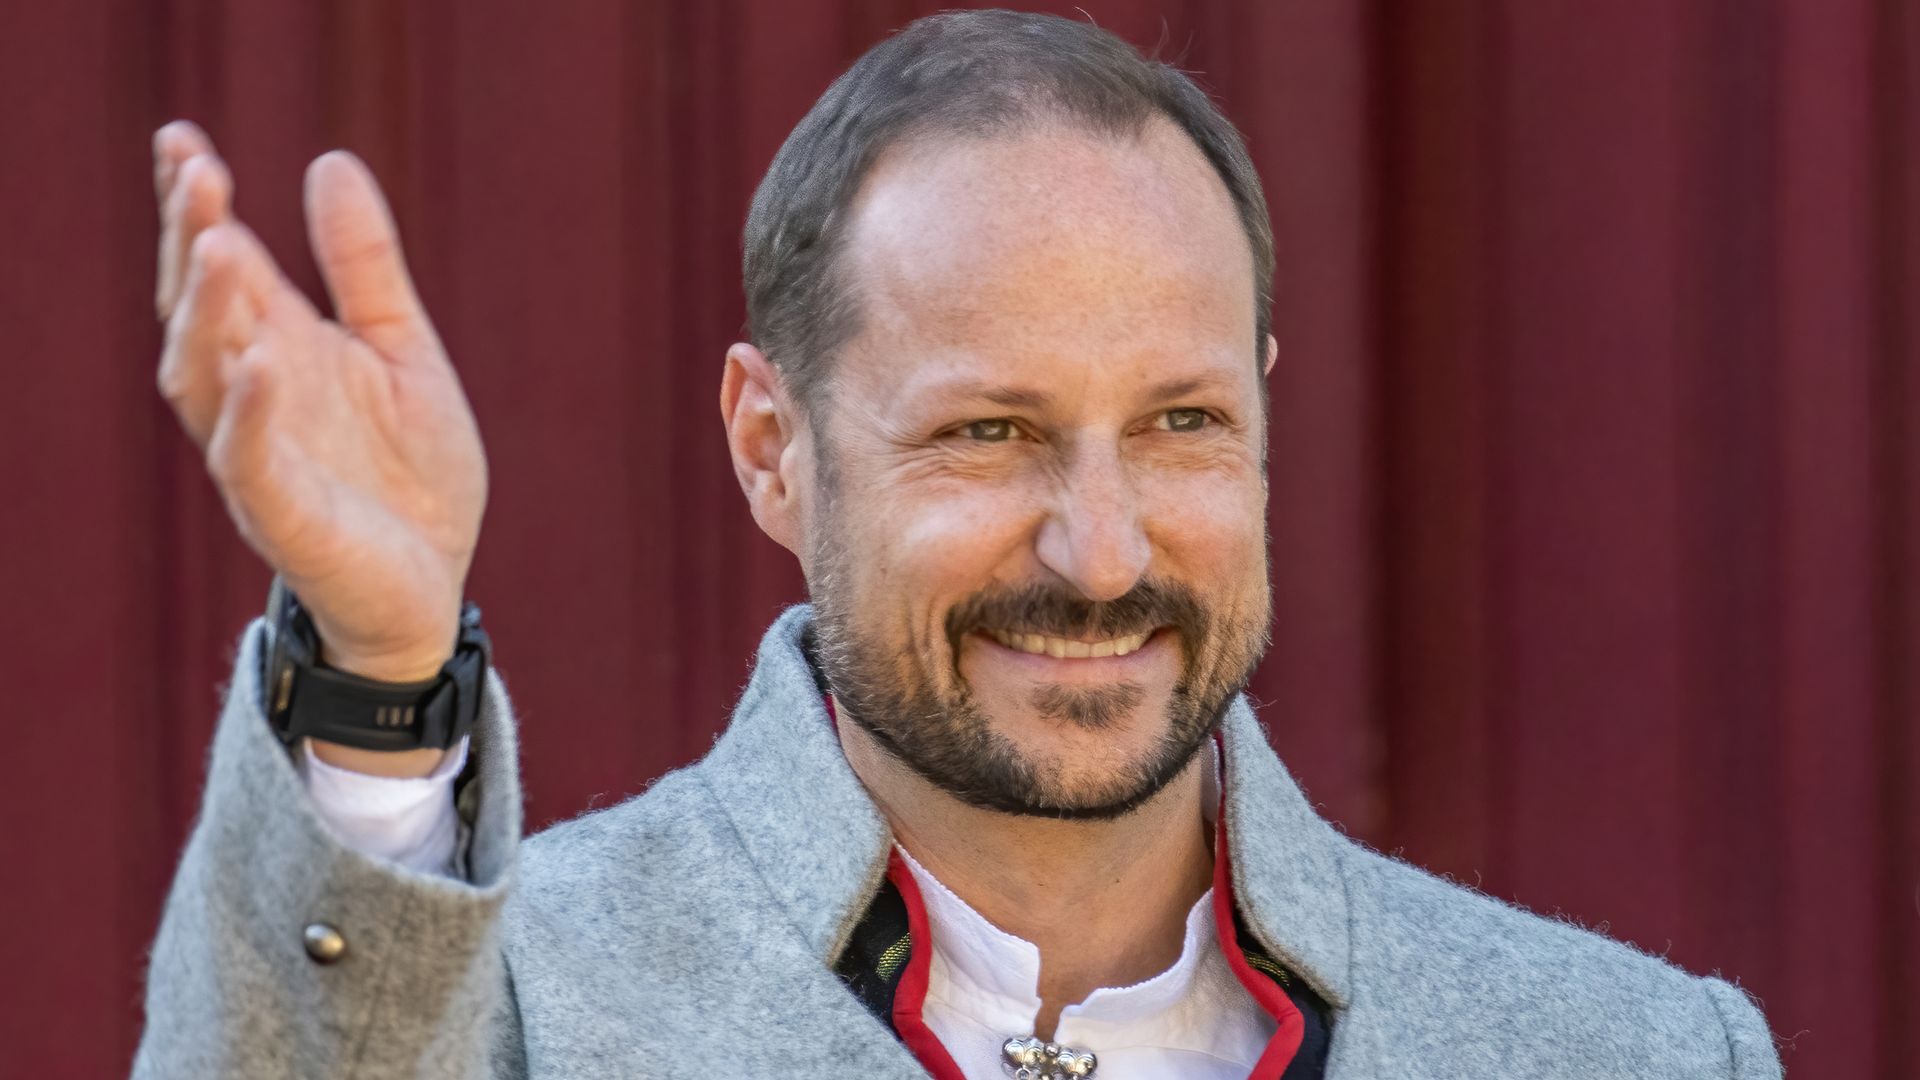 Crown Prince Haakon of Norway smiling and waving